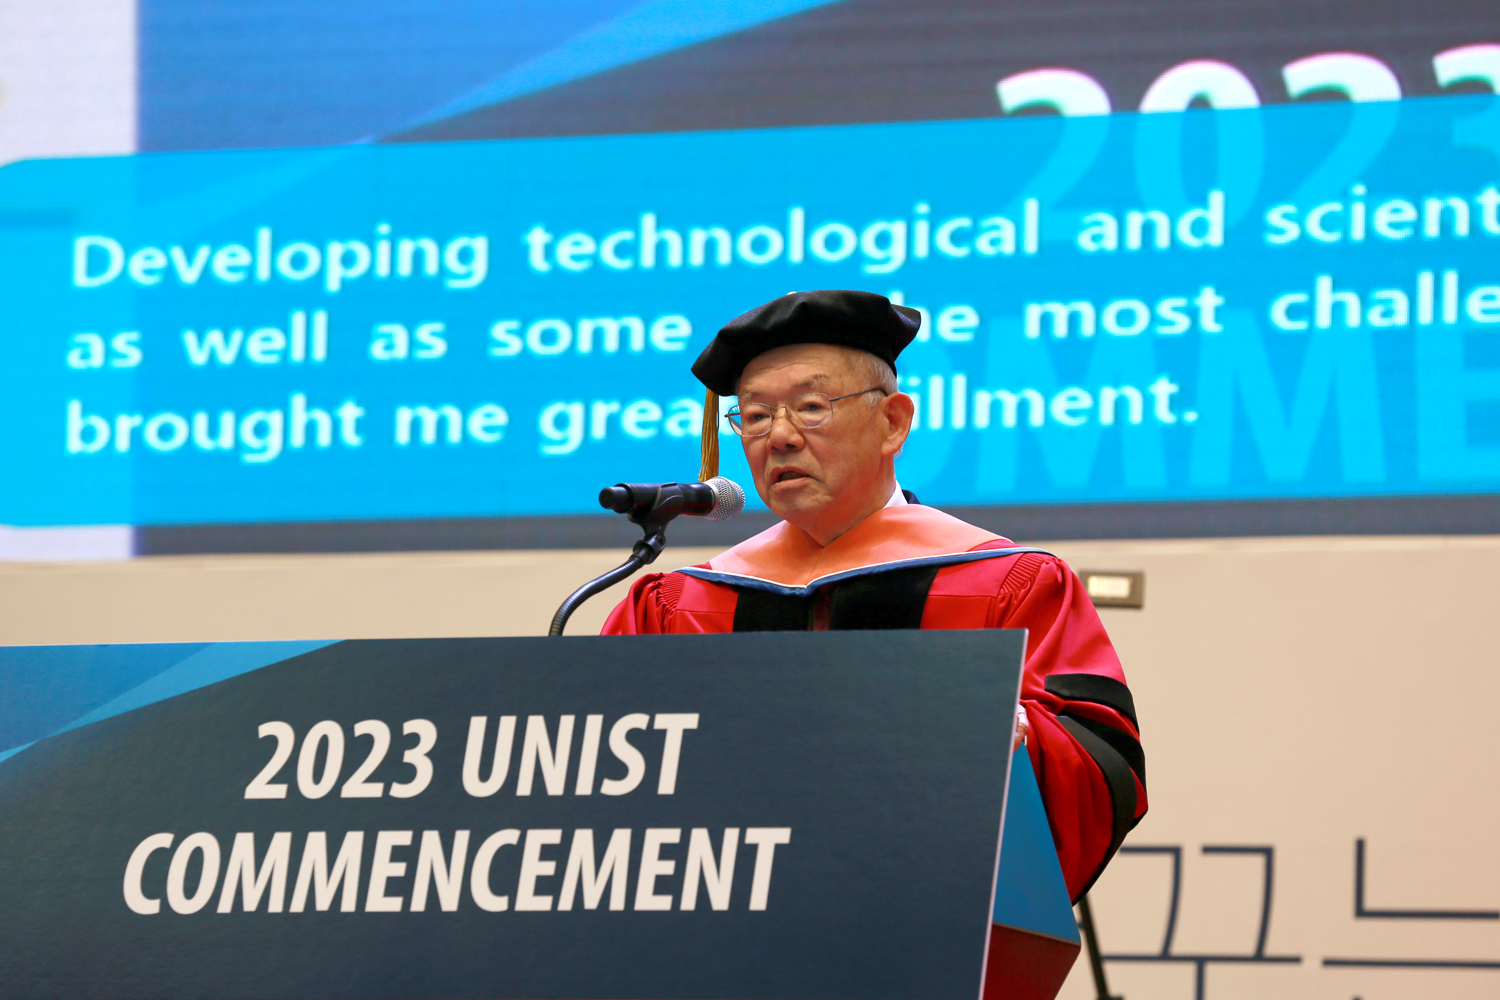 The honorary doctoral degree has been bestowed upon MIT Cross Professor Emeritus Nam Pyo Suh at the 2023 UNIST Commencement Ceremony on February 16, 2023.